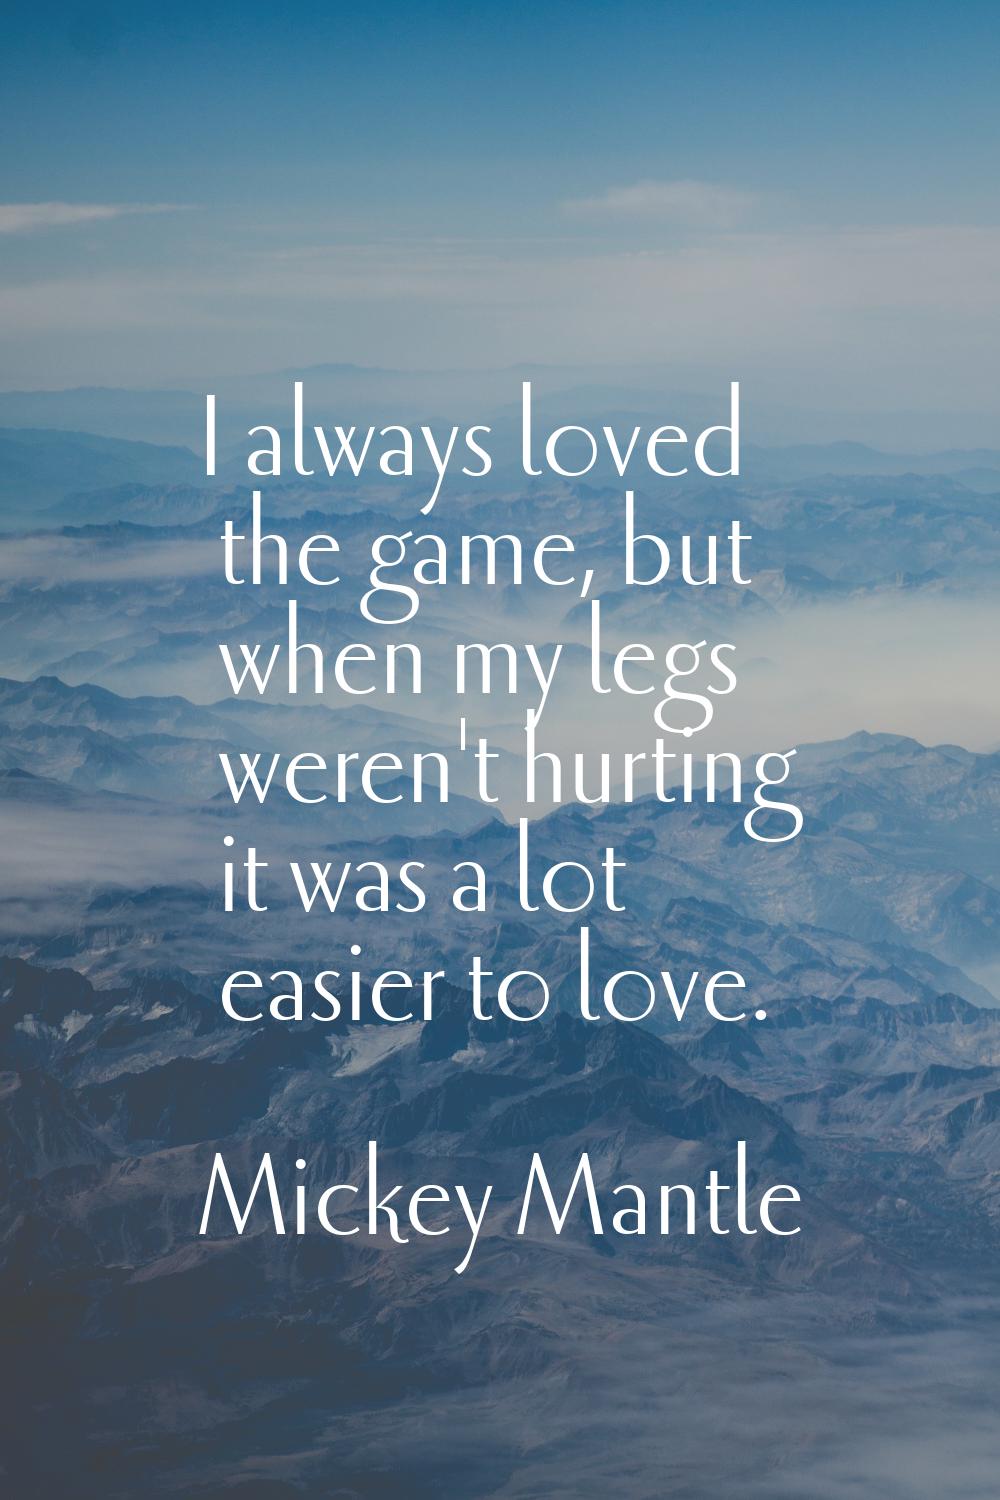 I always loved the game, but when my legs weren't hurting it was a lot easier to love.